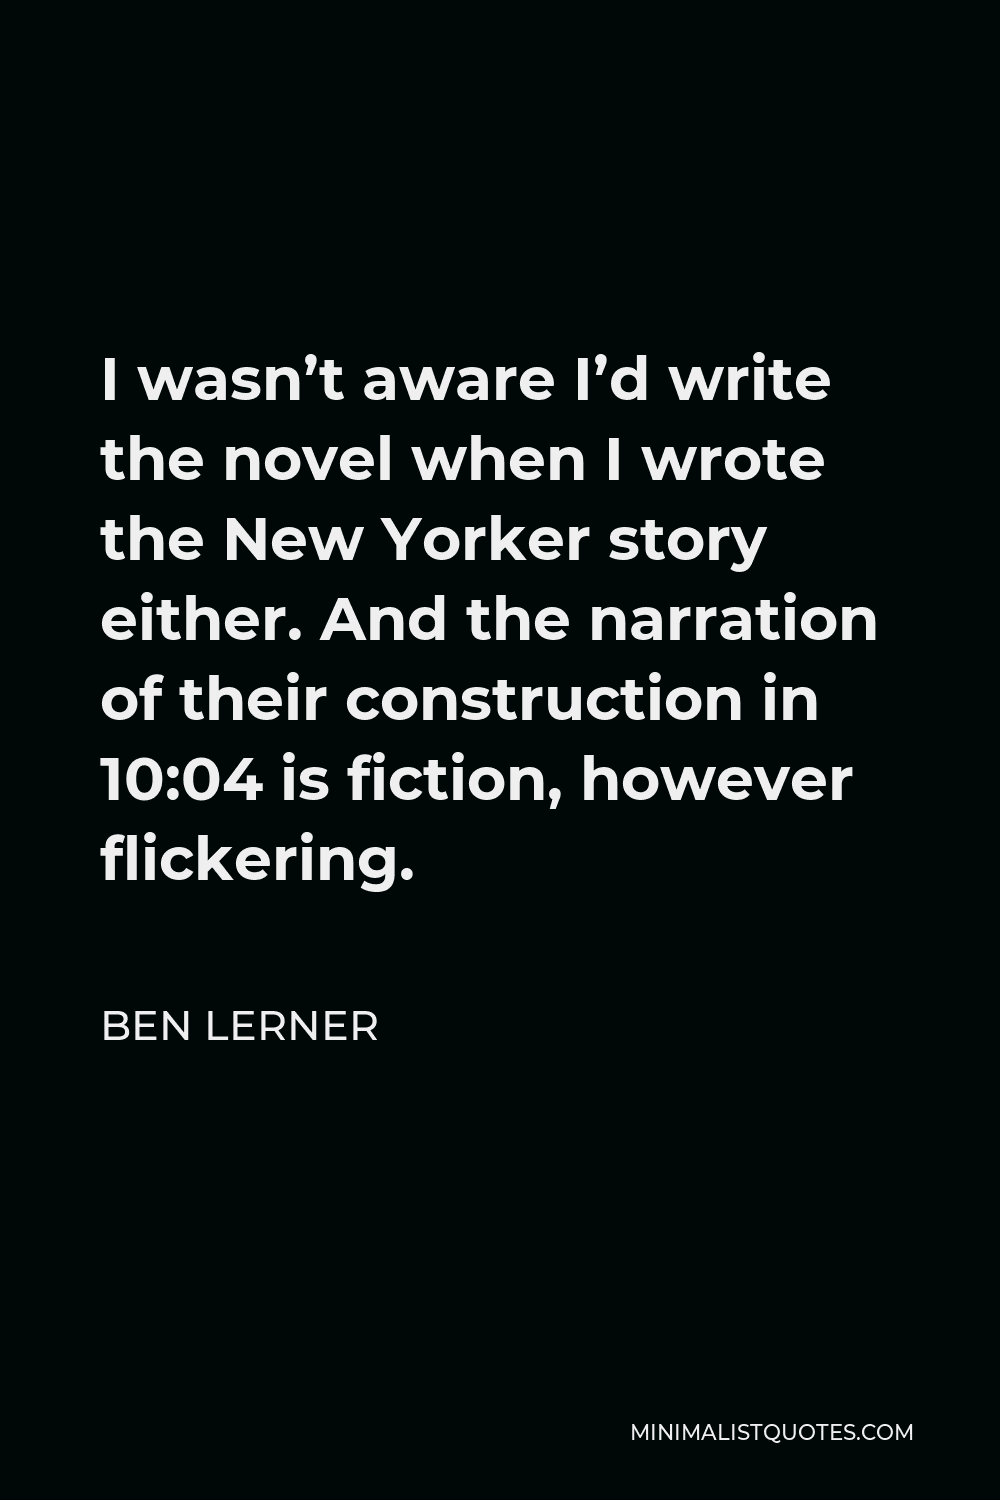 Ben Lerner Quote - I wasn’t aware I’d write the novel when I wrote the New Yorker story either. And the narration of their construction in 10:04 is fiction, however flickering.